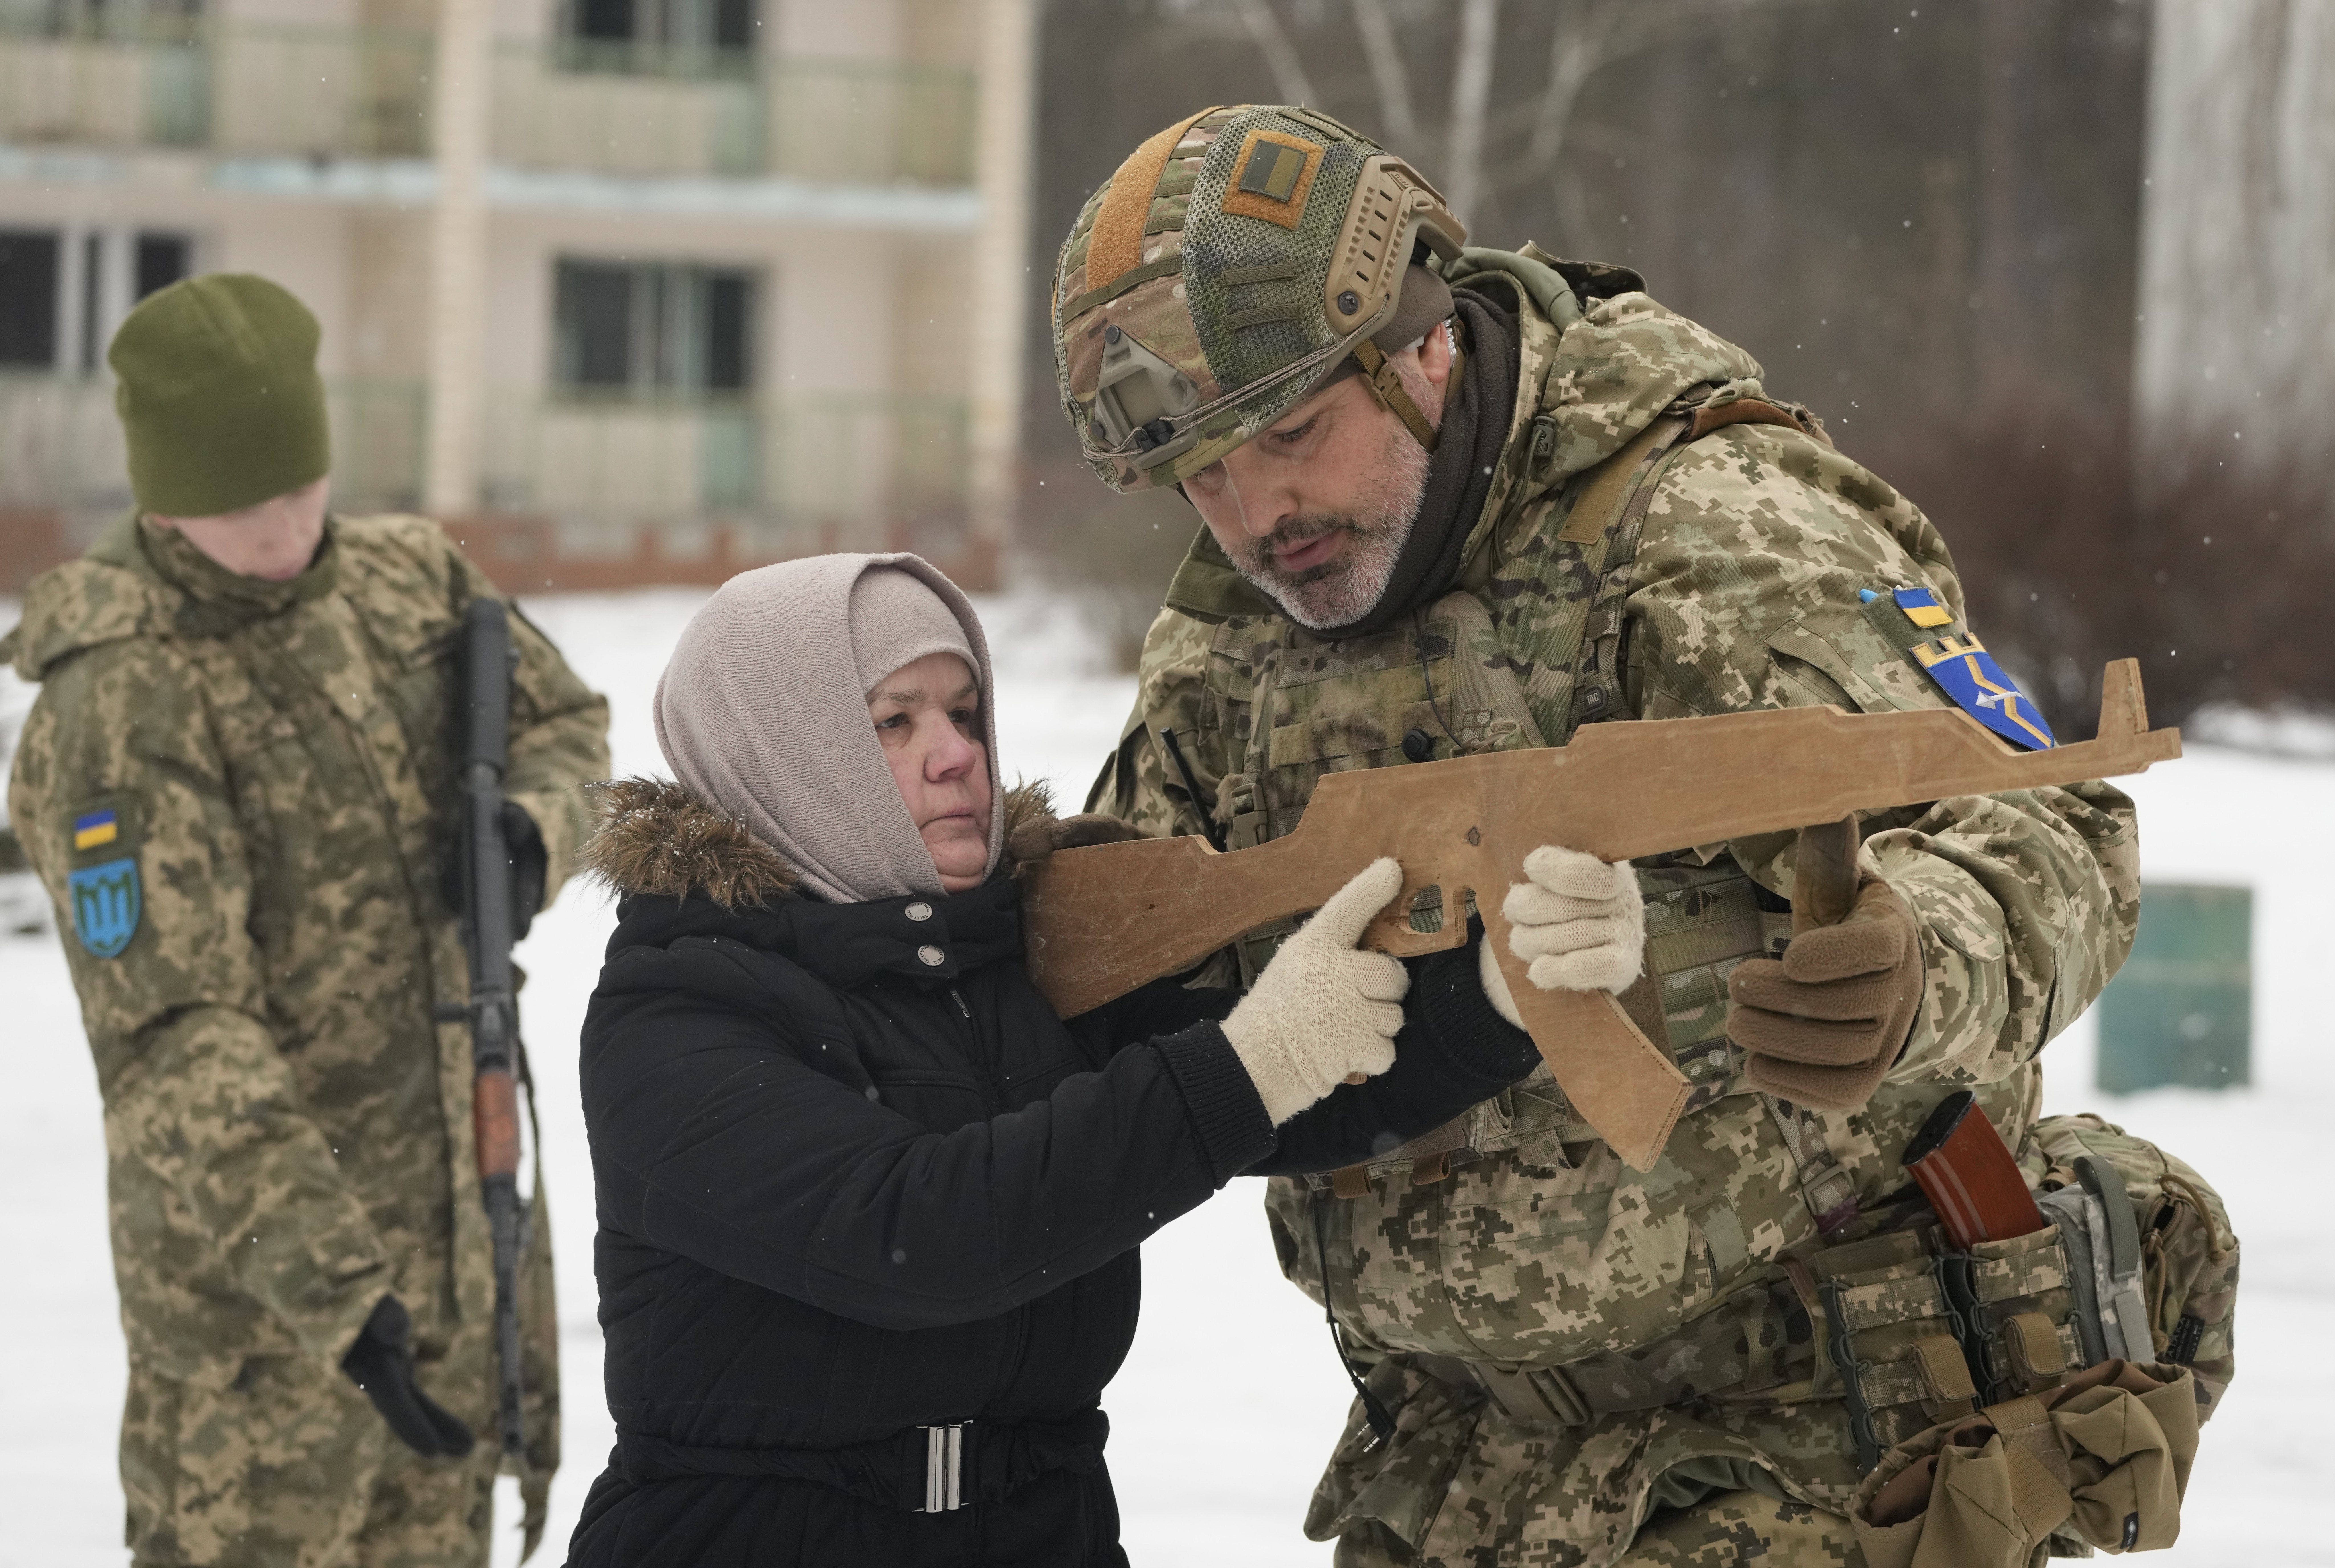 In Ukraine Civilians with cardboard guns train for potential war with Russia Trudy Rubin